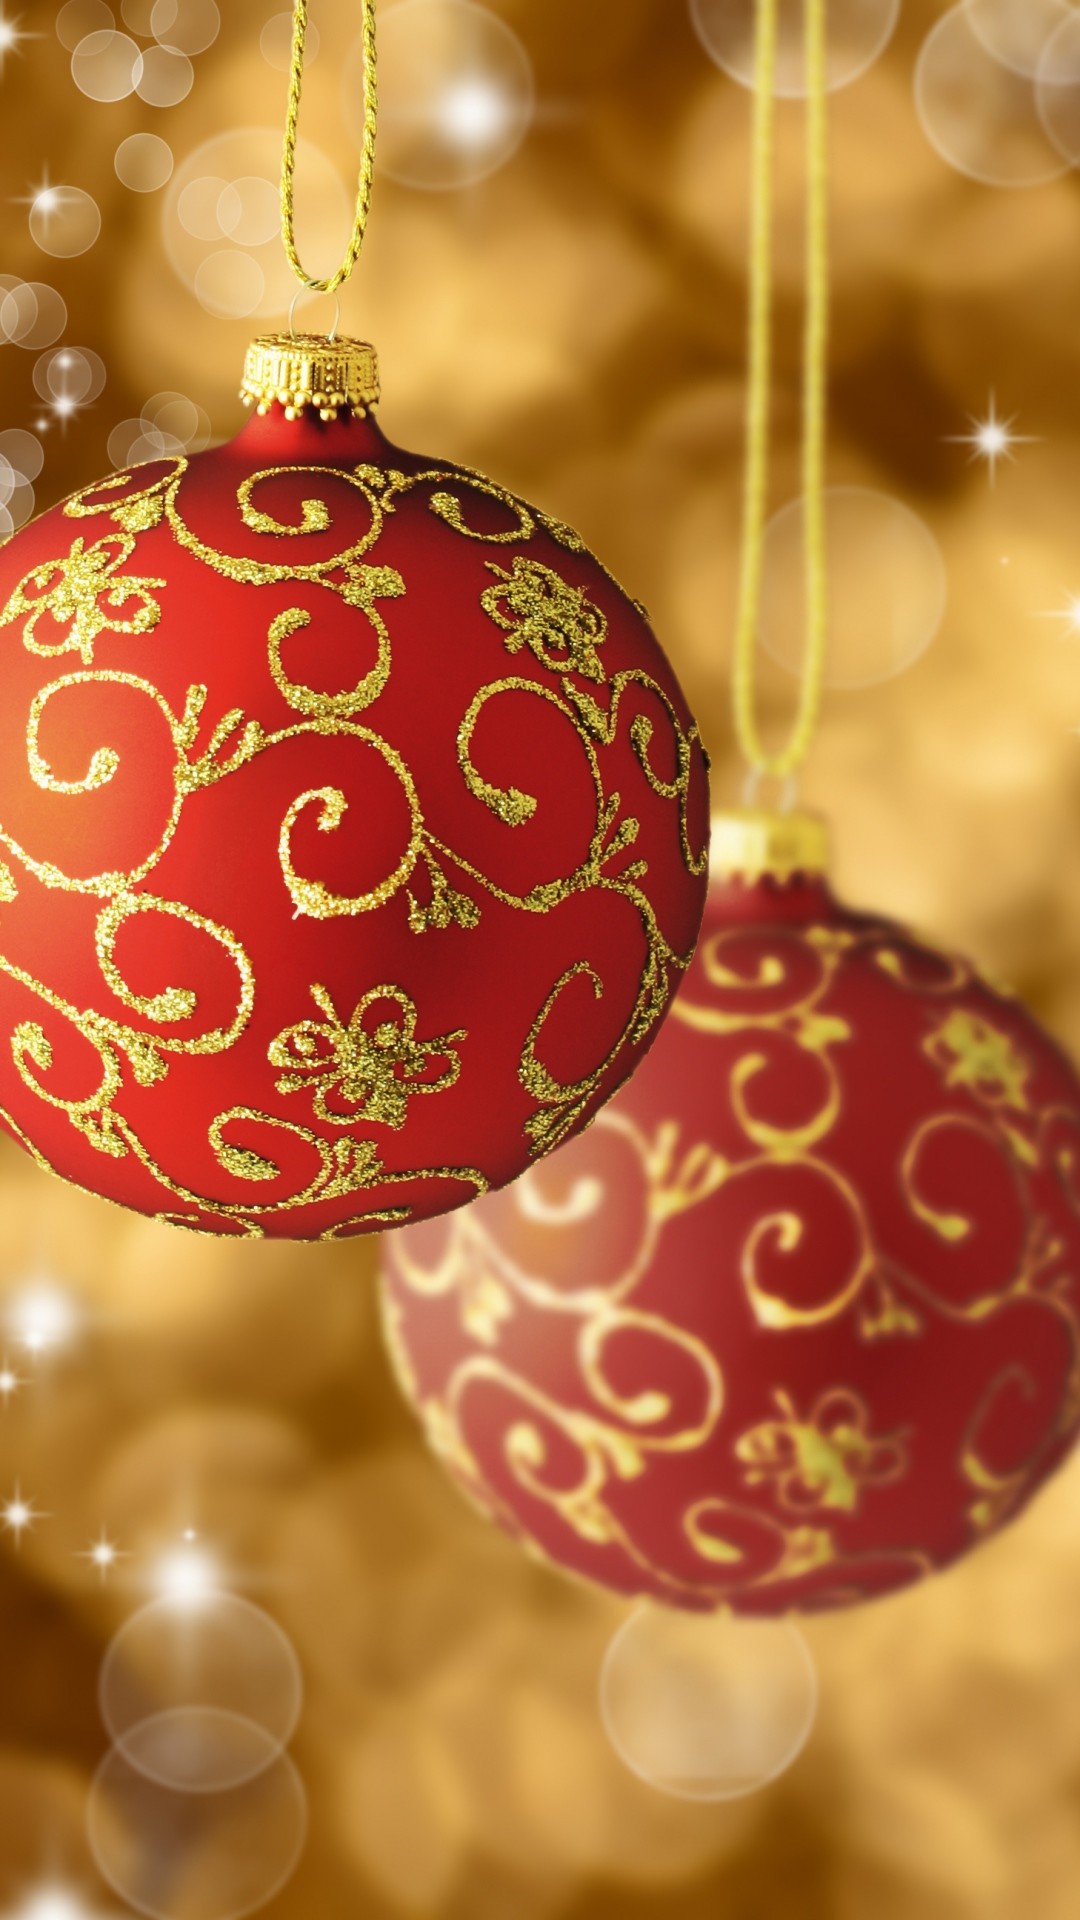 1080x1920 Red Gold Christmas Balls Tree Decorations Android Wallpaper ...